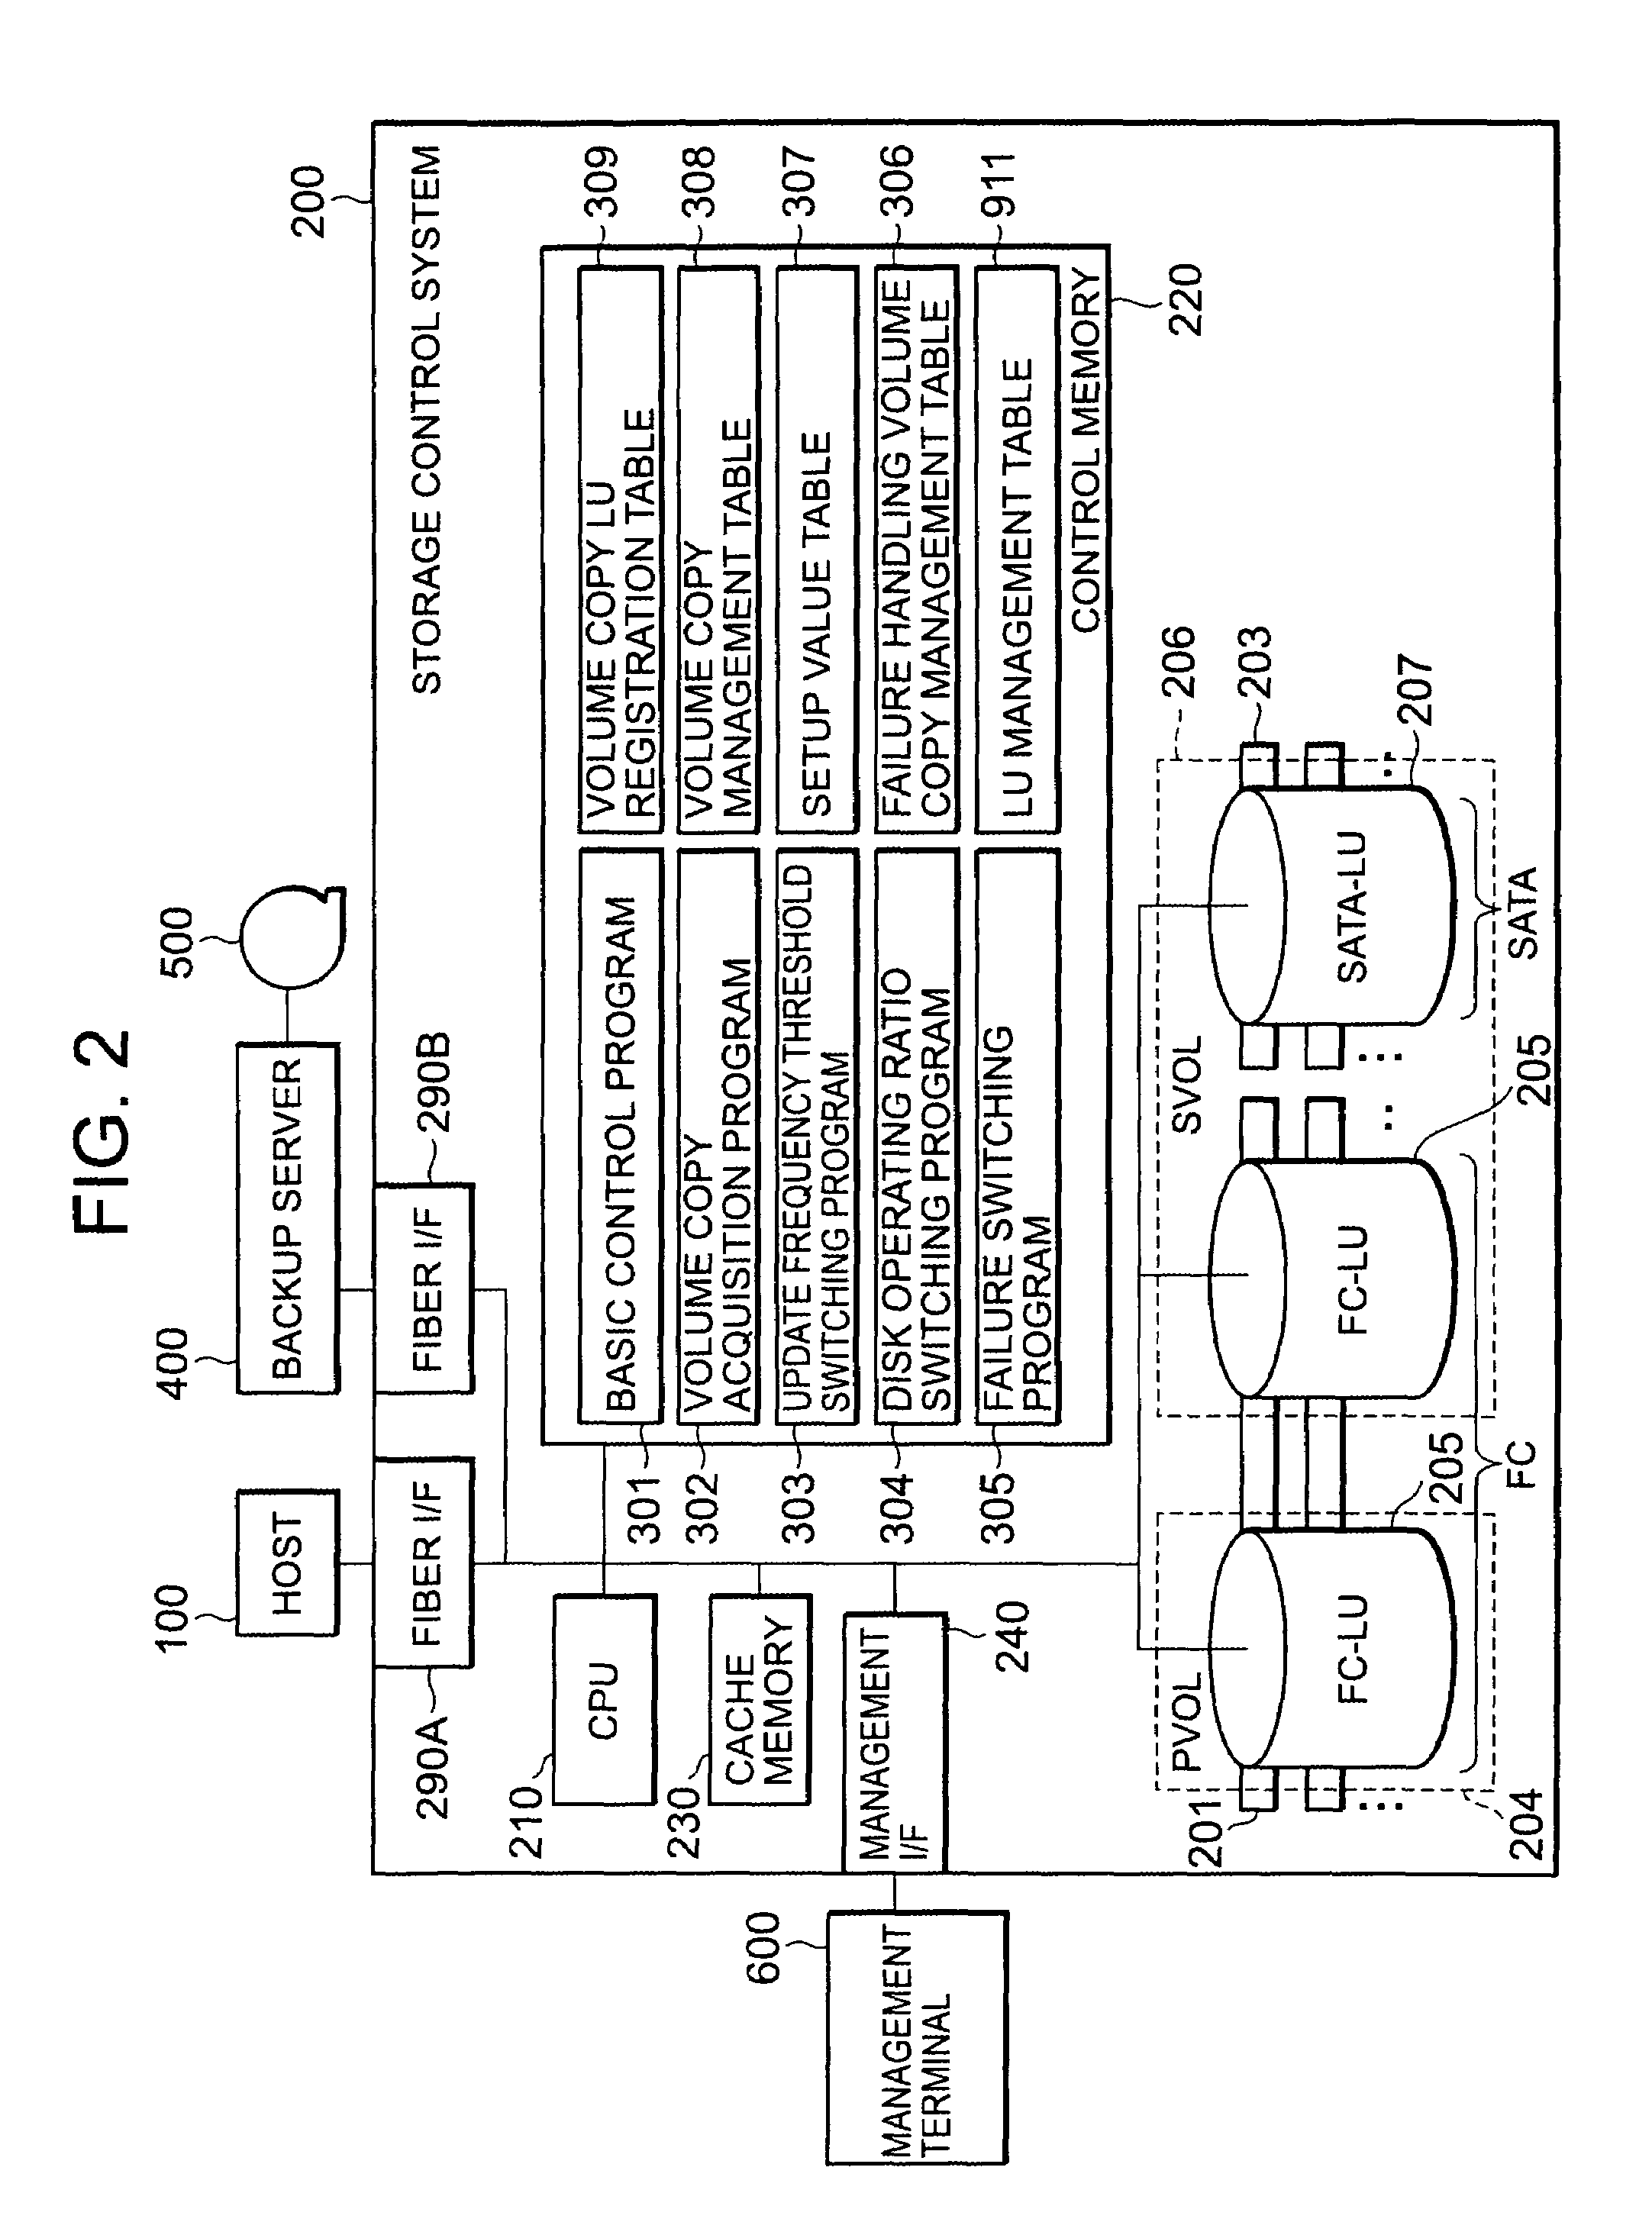 Storage control system and method